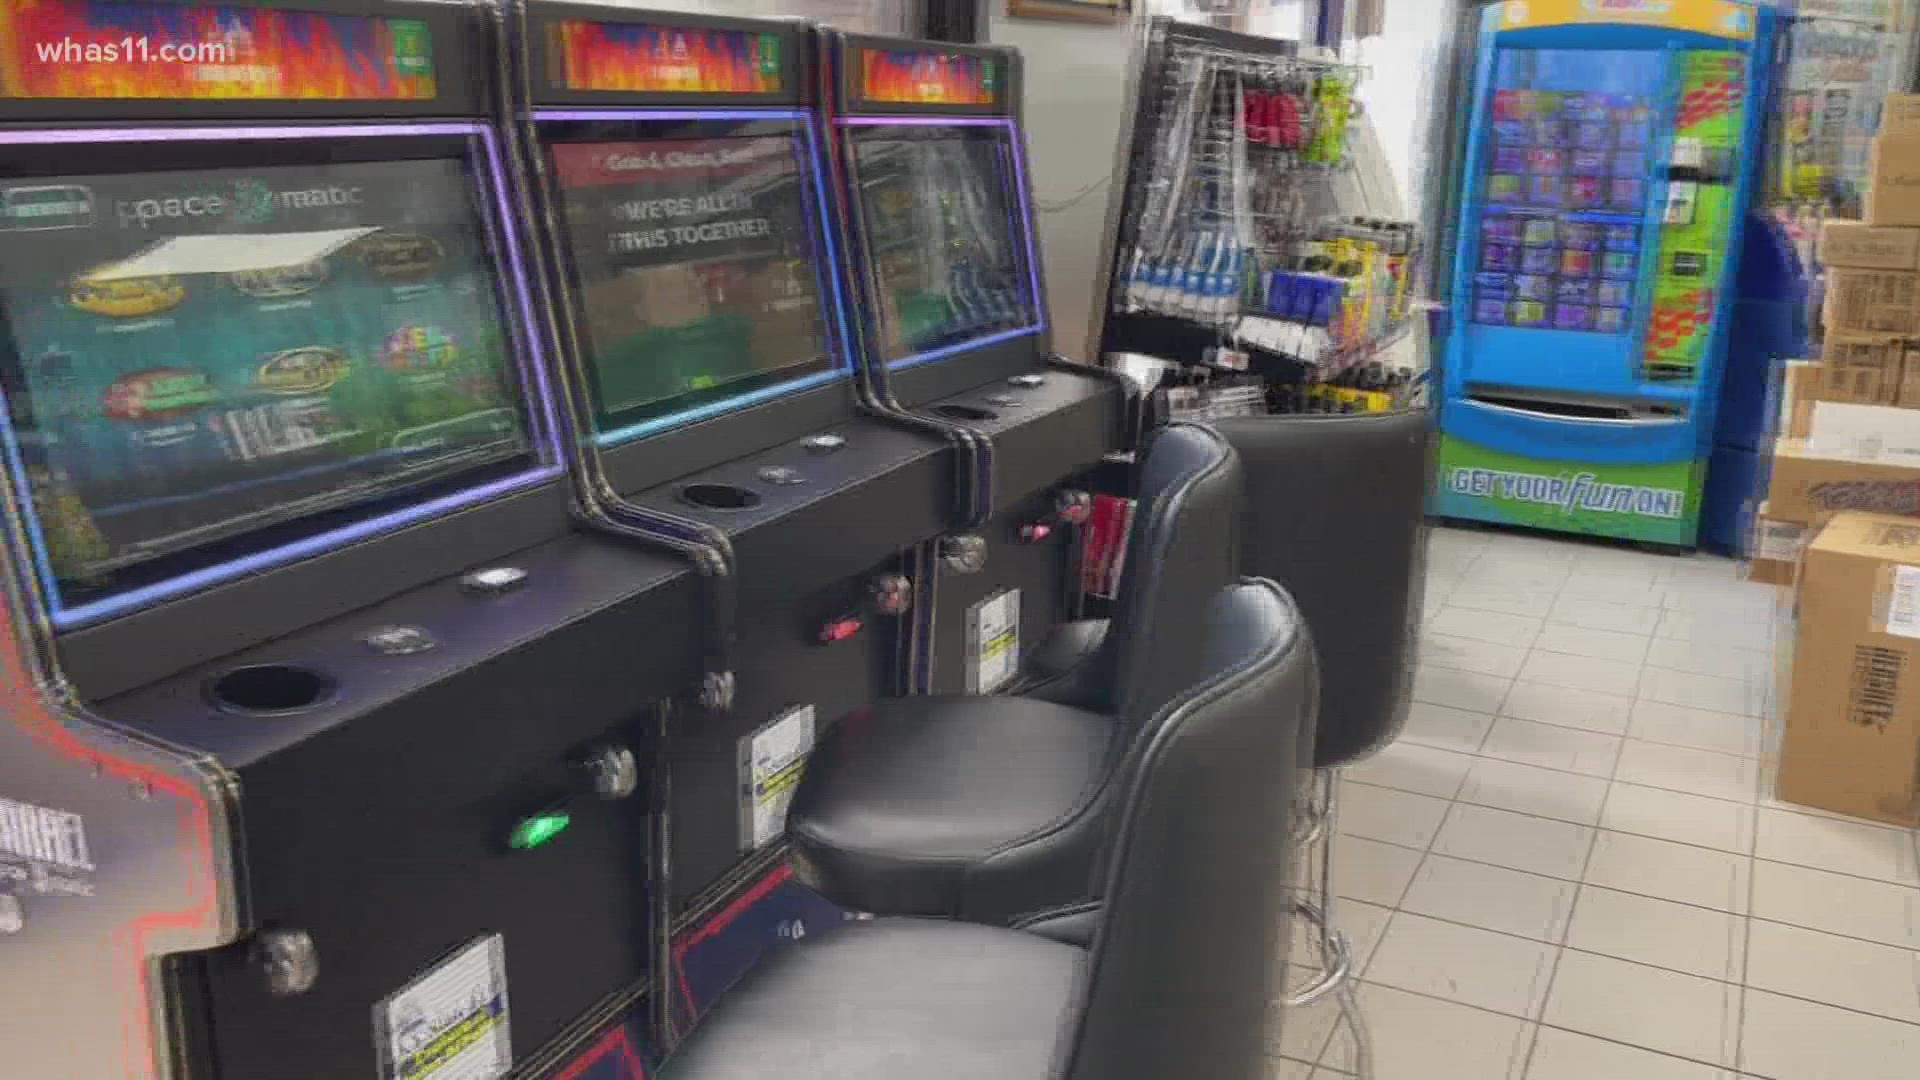 The machine developers say they are skill-based games and aren't technically slot machines, and they feel that means they're legal.